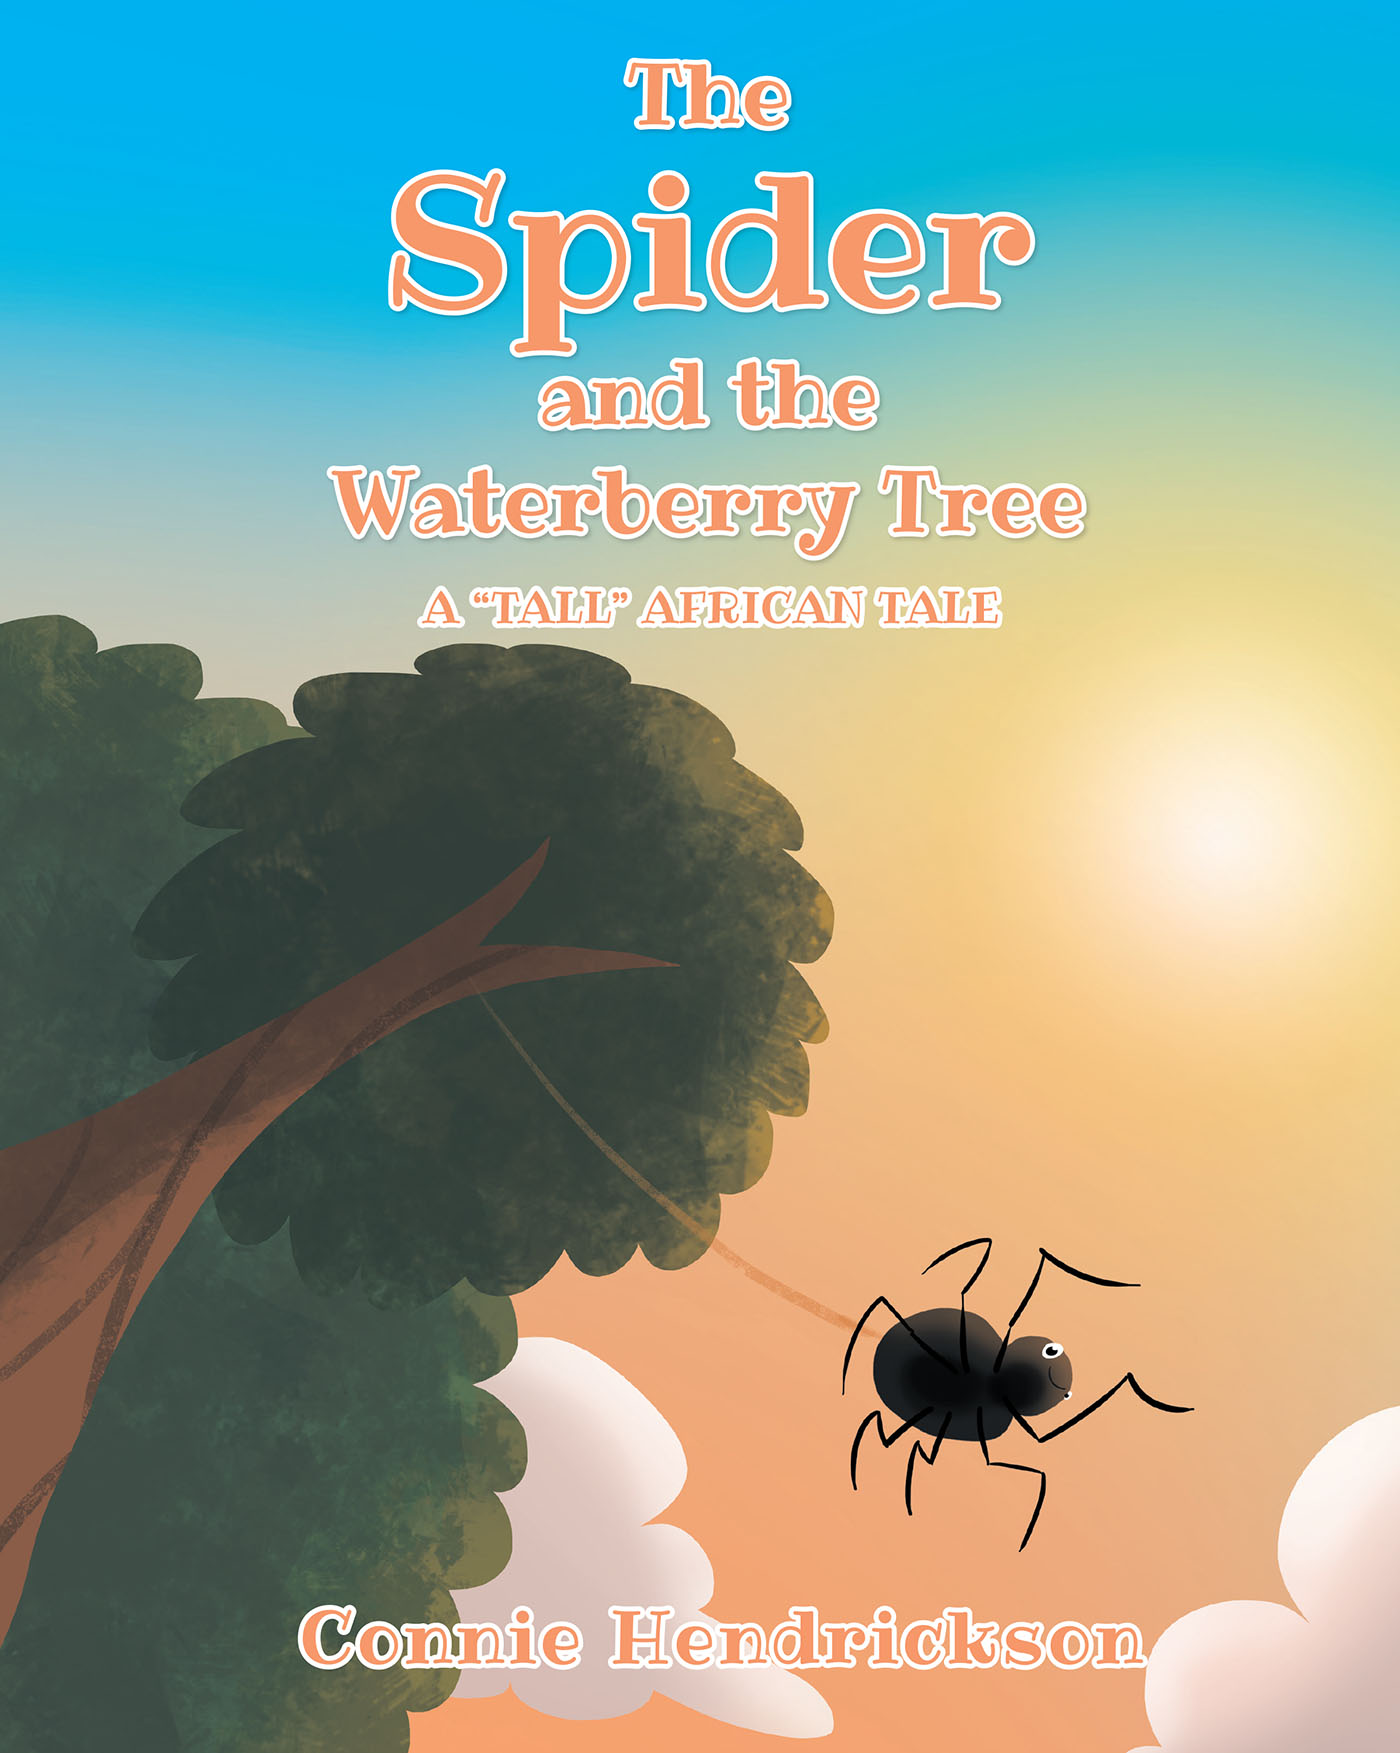 Author Connie Hendrickson’s New Book, “The Spider and the Waterberry Tree: A ‘Tall’ African Tale,” is an Inspiring Story About Friendship and Courage